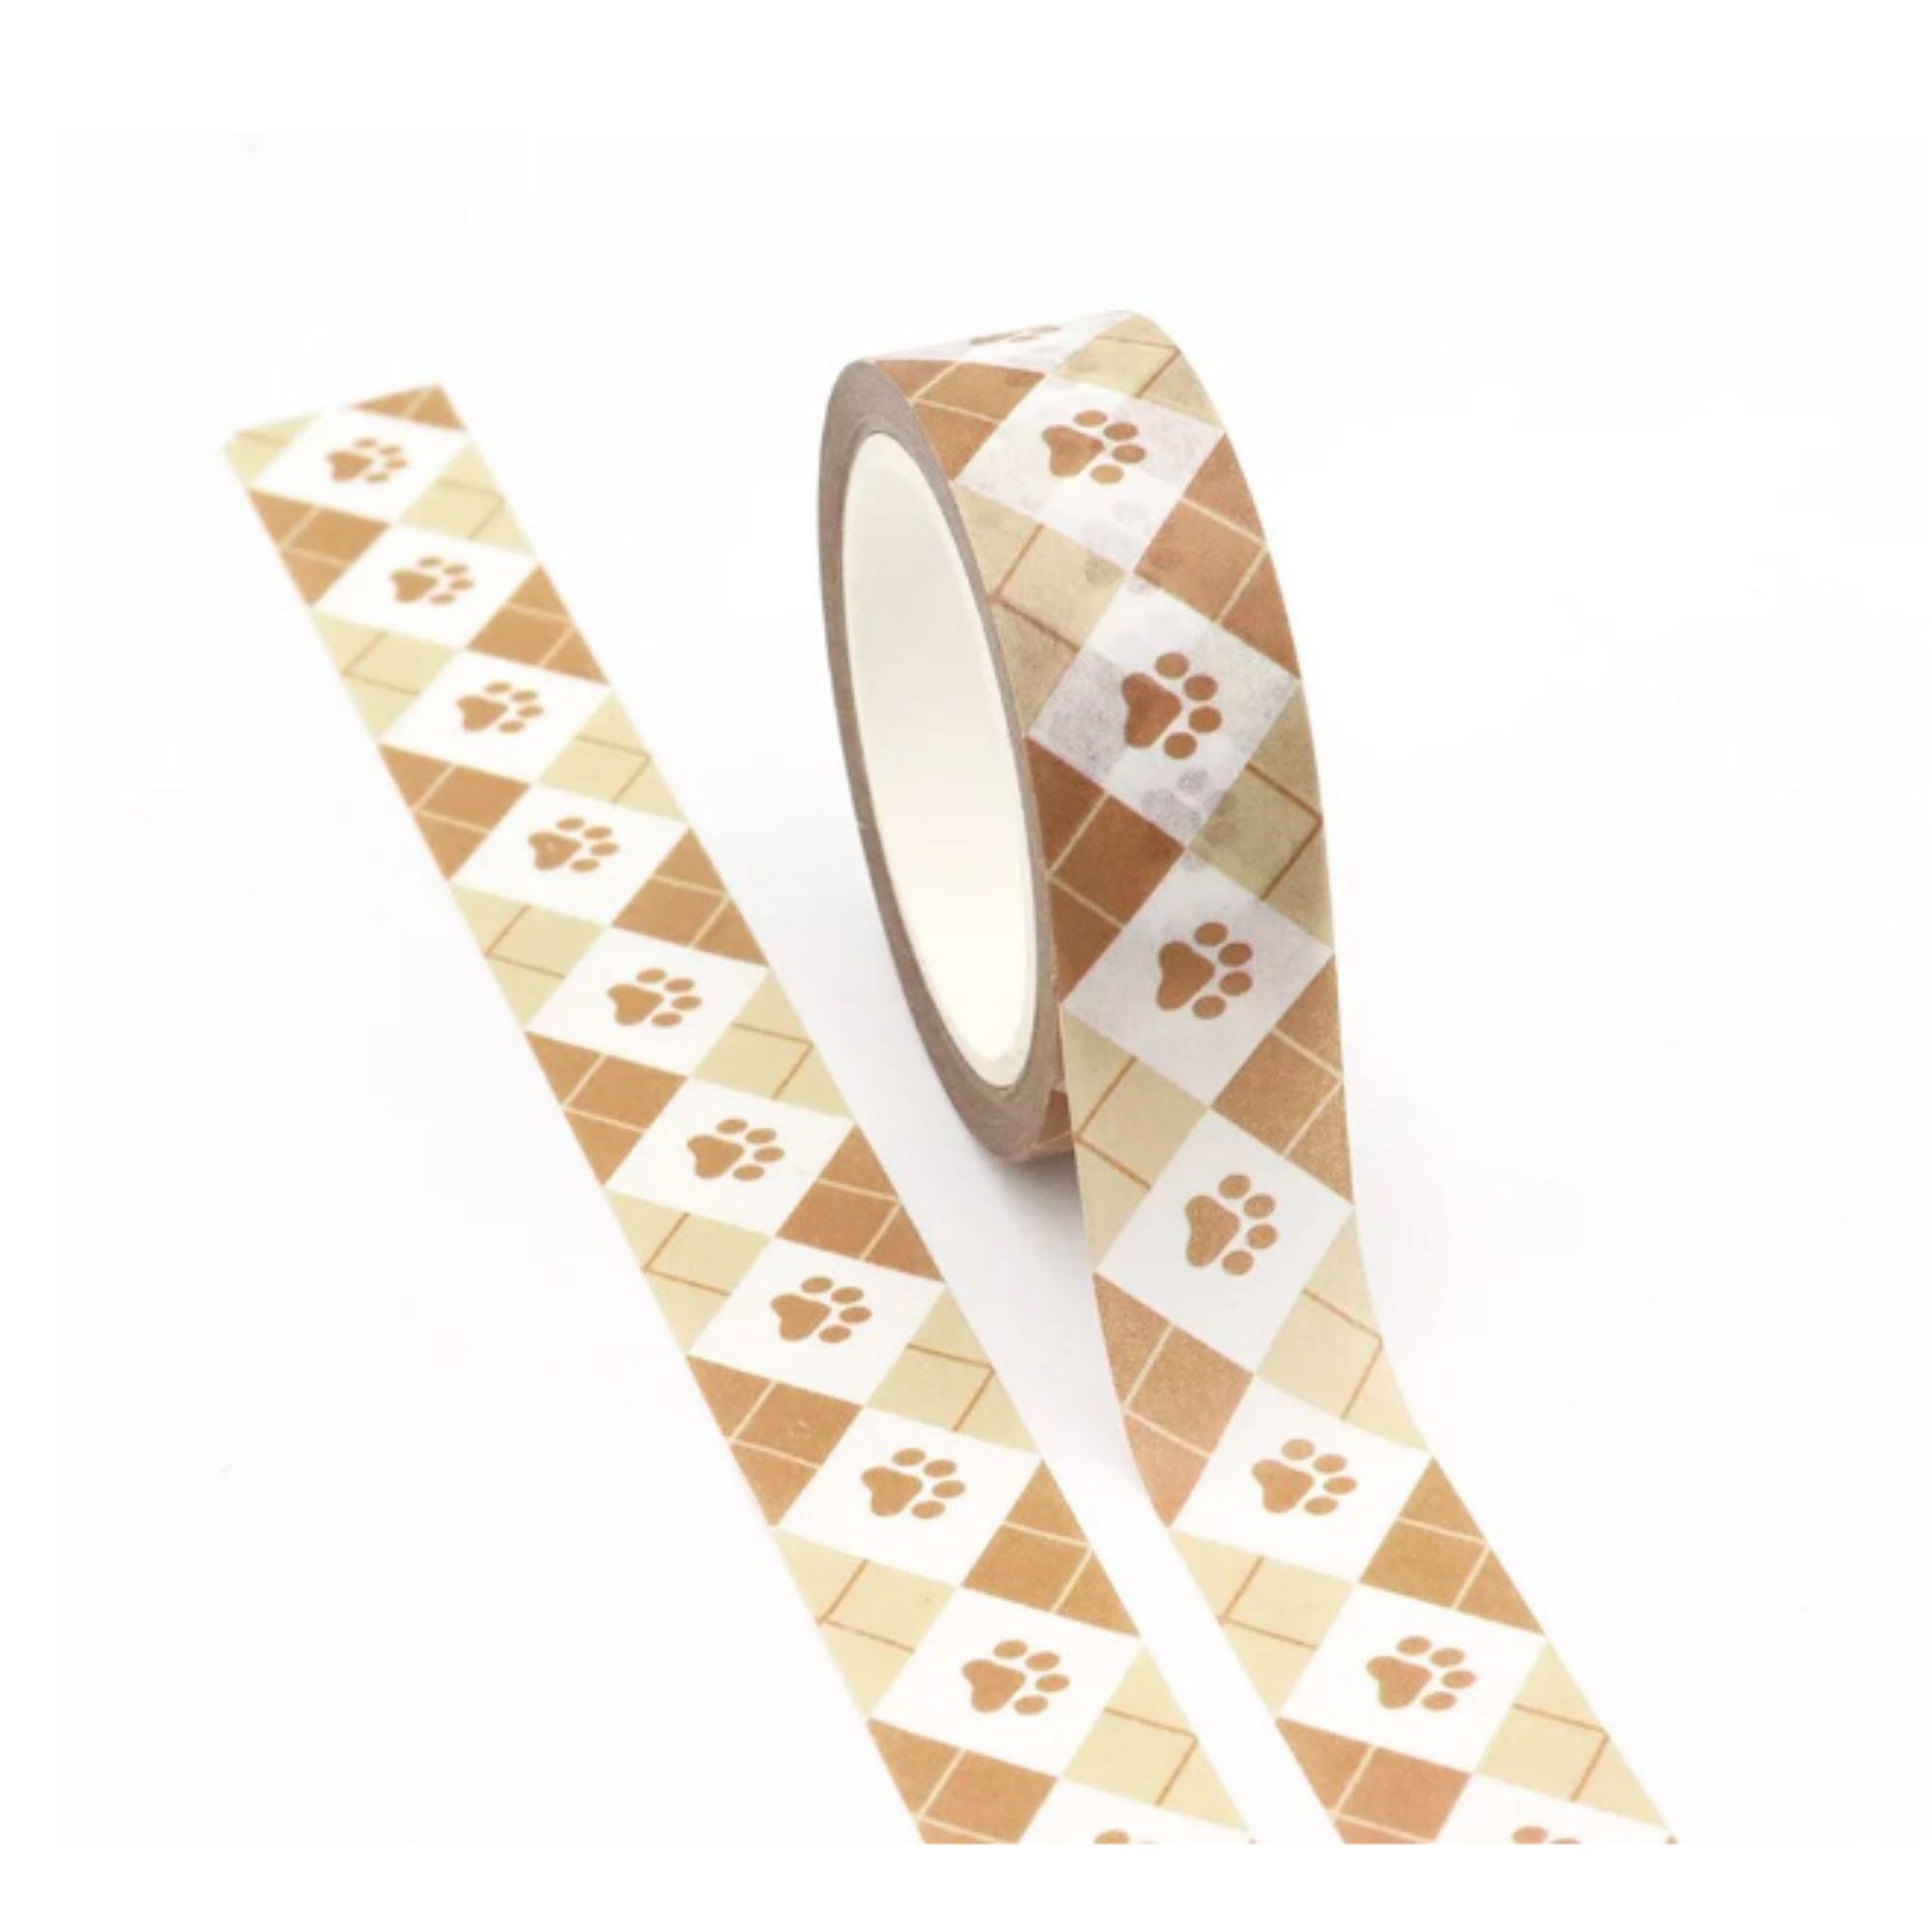 TW Collection Dog Paws 15mm x 15 Feet Washi Tape by SSC Designs